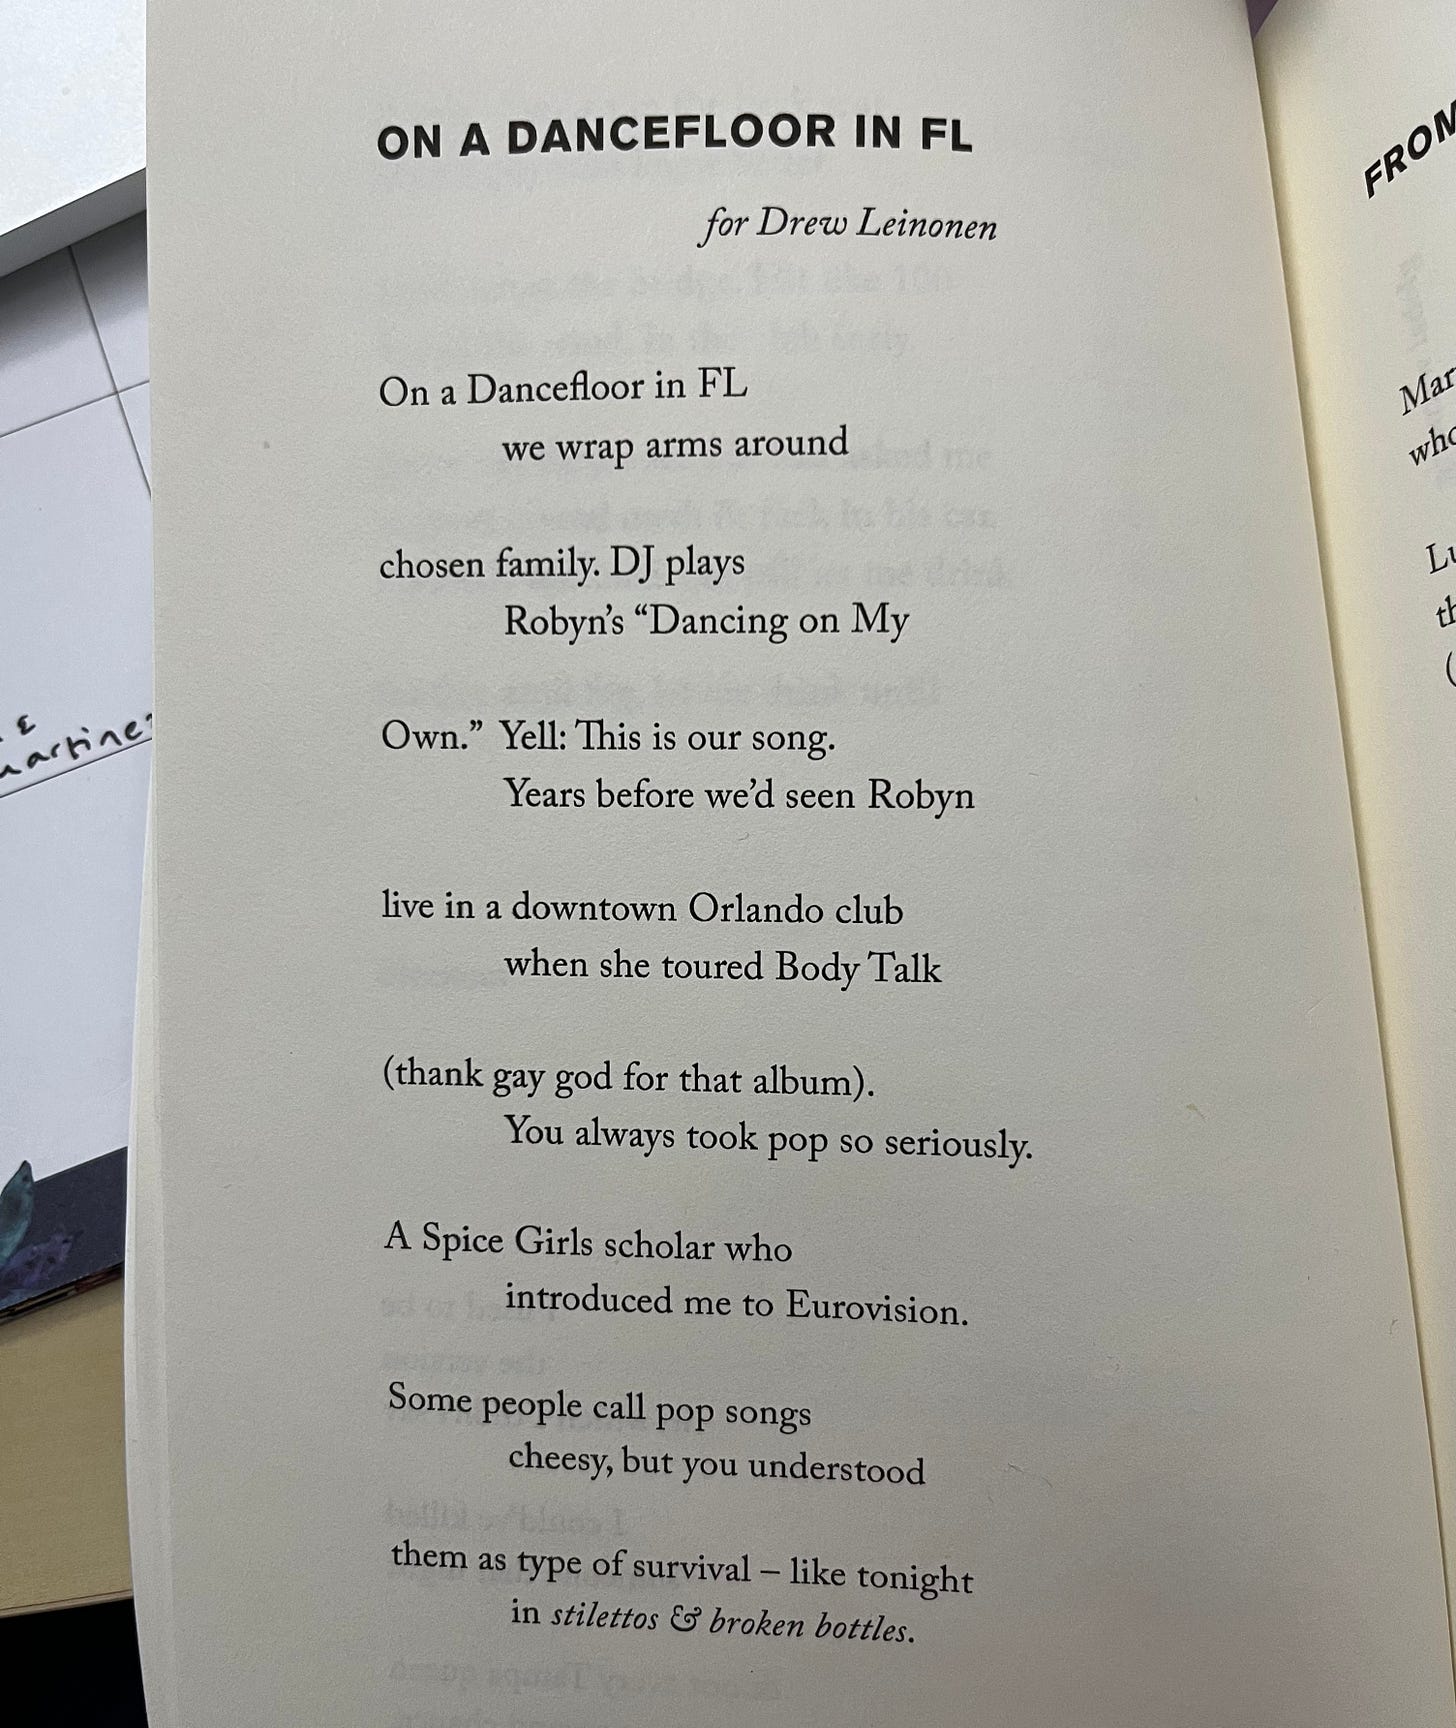 Poem called "On a Dancefloor in FL" that says for Drew Leinonen and then: "On a Dancefloor in FL/we wrap arms around/chosen family. DJ plays/Robyn's "Dancing on My/Own." Yell: This is our song./Years before we'd seen Robyn/live in a downtown Orlando club/when she toured Body Talk/(thank gay god for that album)./You always took pop so seriously./A Spice Girls scholar who/introduced me to Eurovision./Some people call pop songs/cheesy, but you understood/them as type of survival -- like tonight/in stilettos & broken bottles."